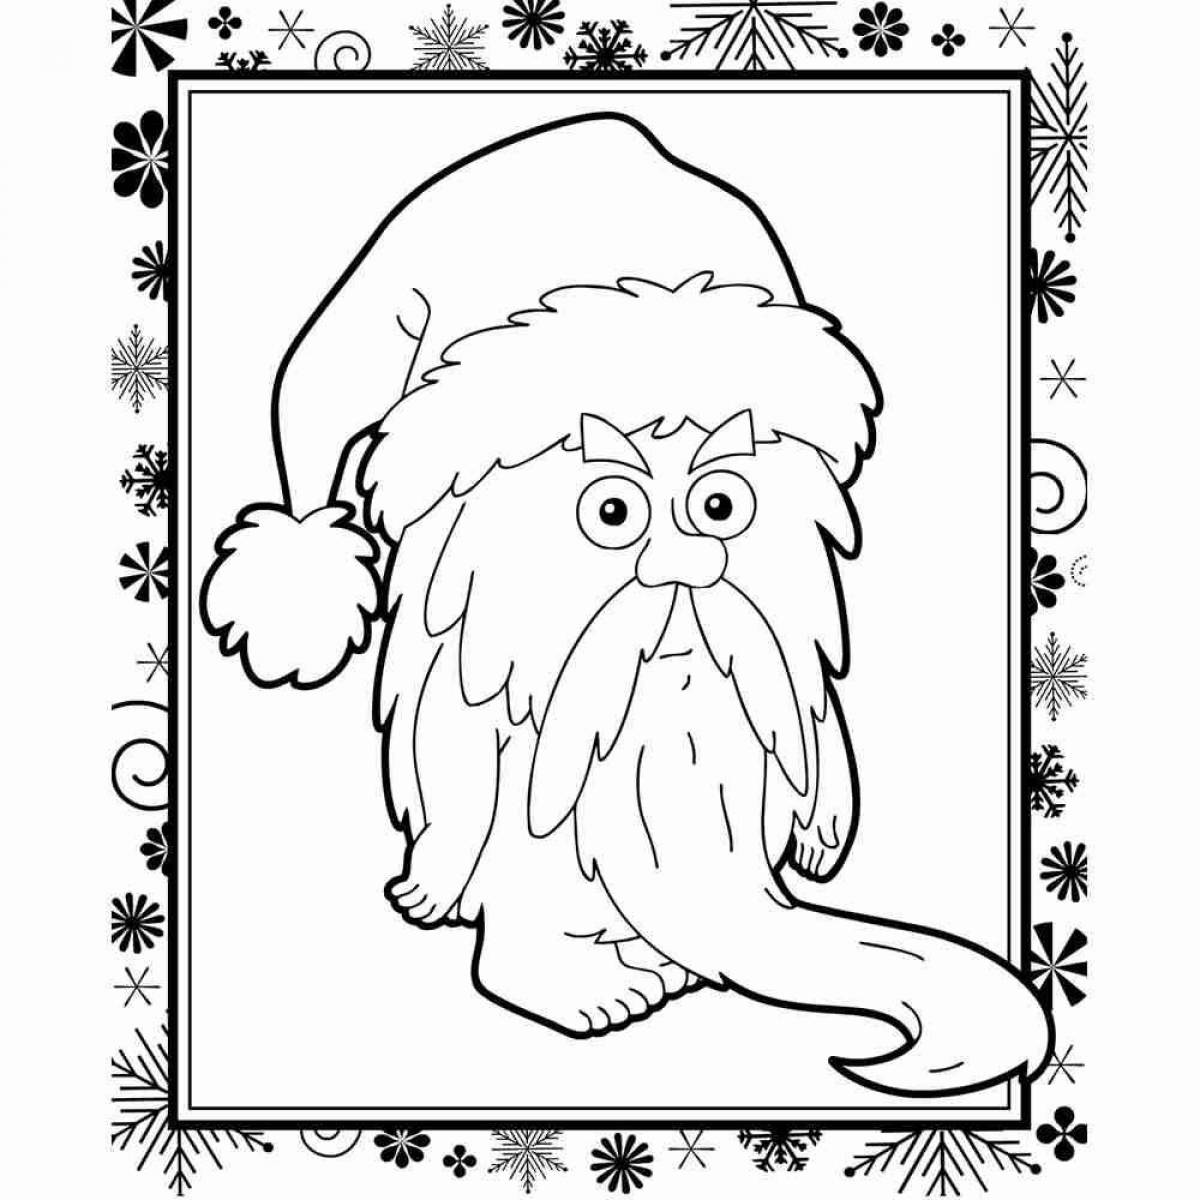 Coloring page wild face of santa claus